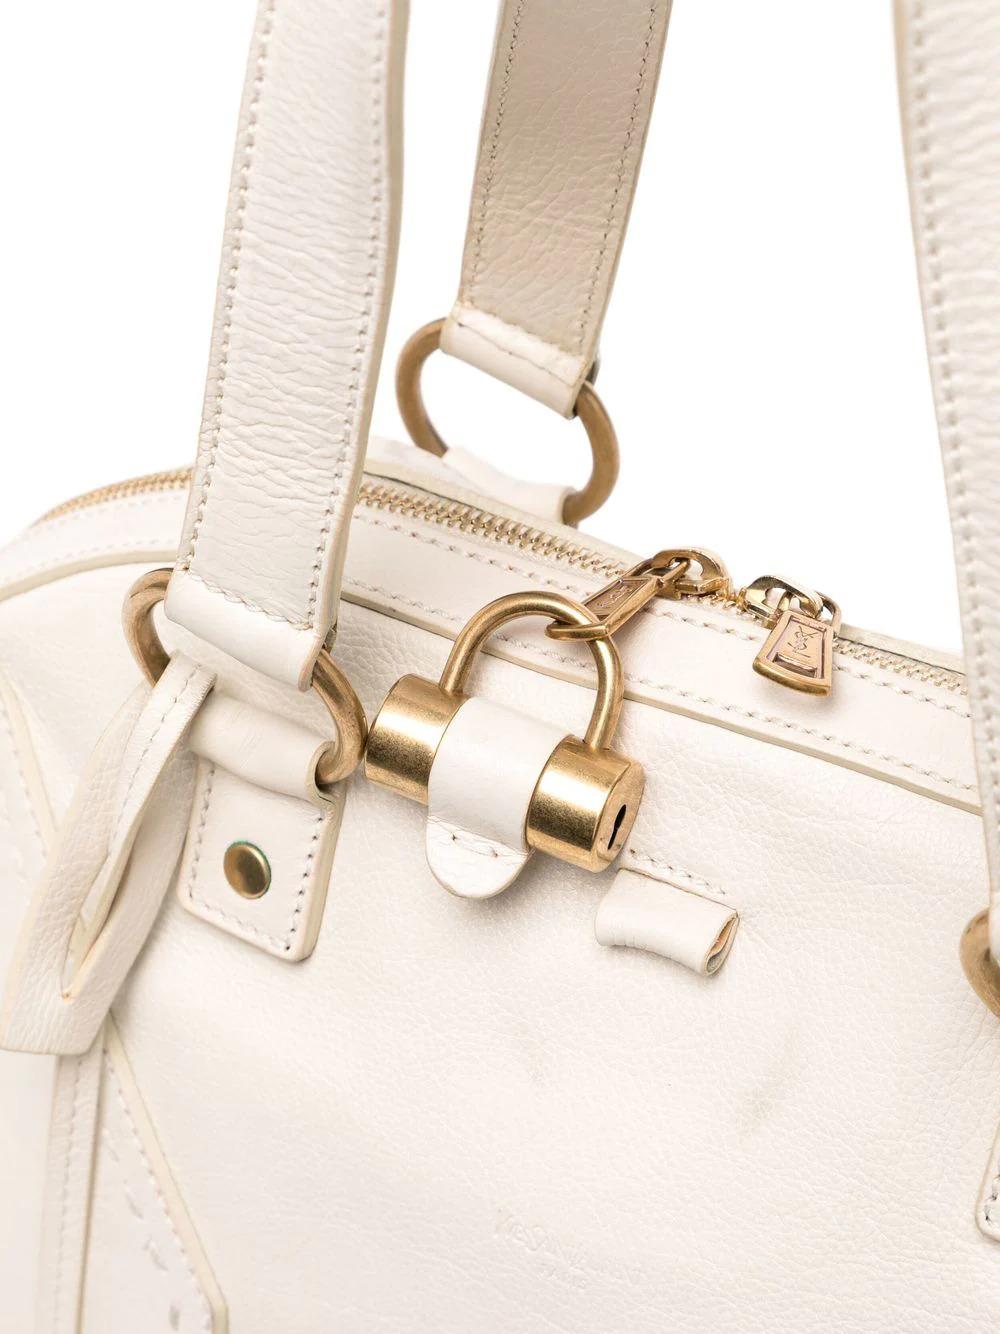 Beige Yves Saint Laurent Muse Leather Tote Bag